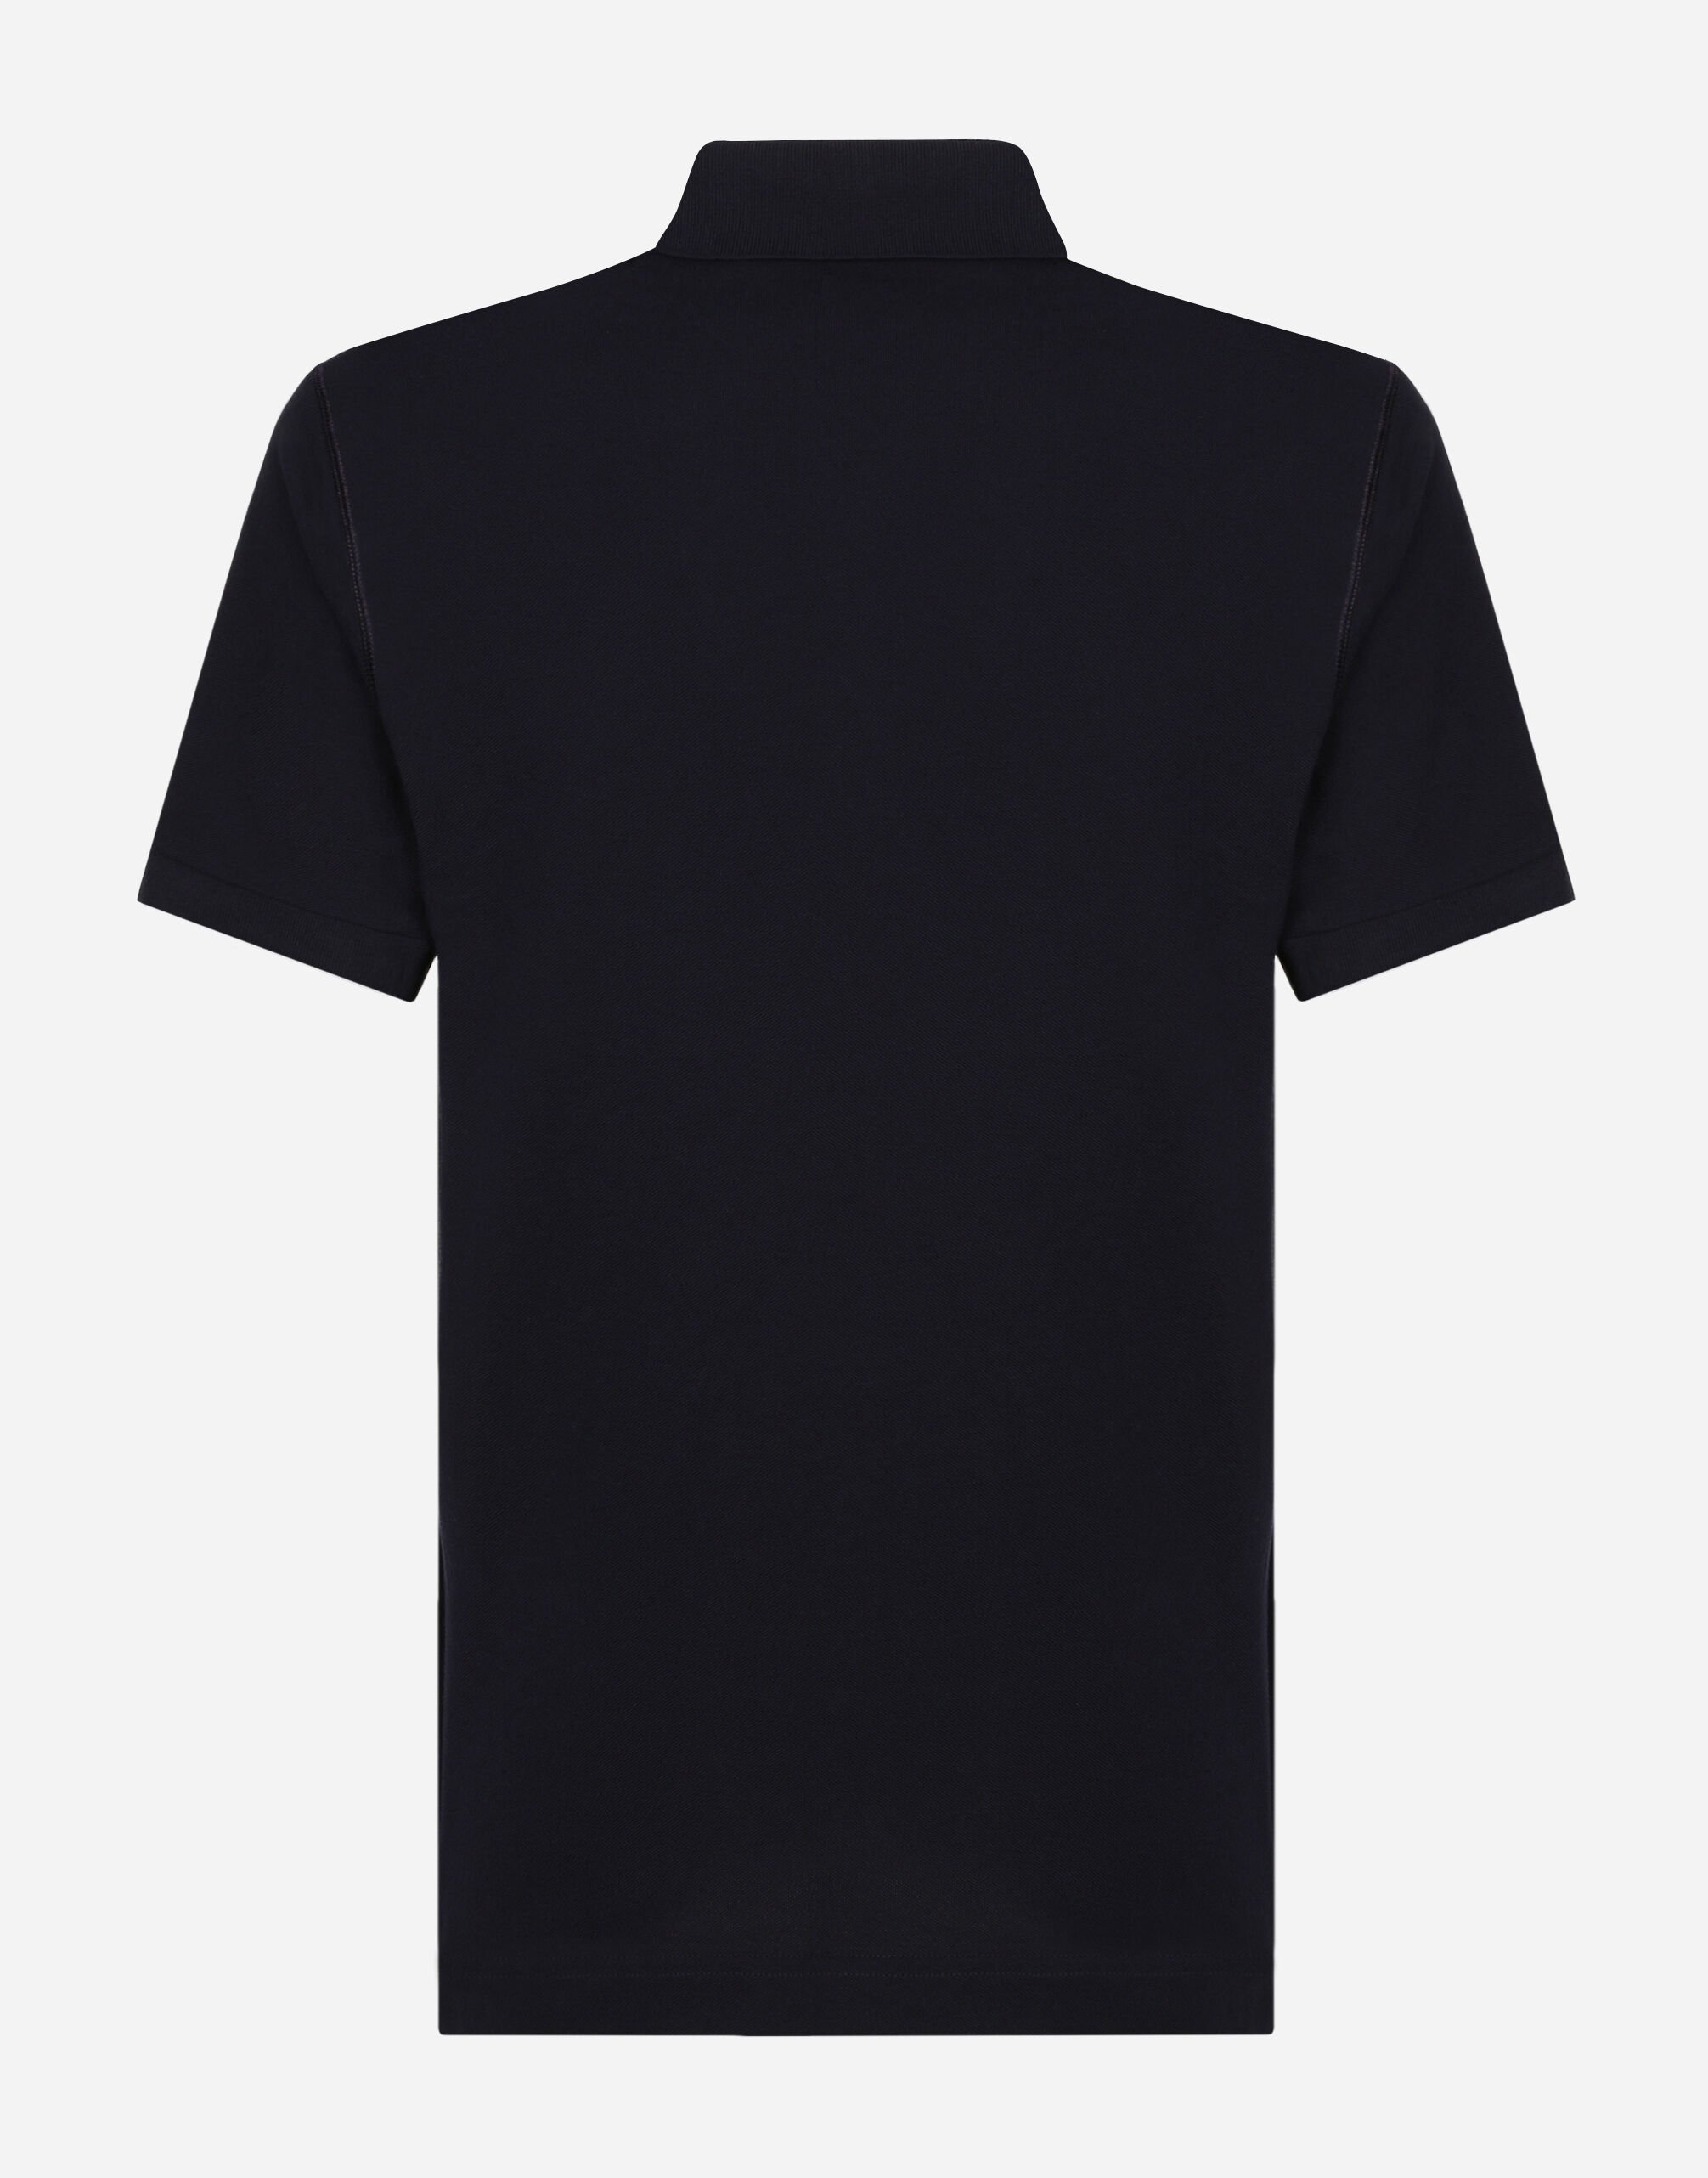 Cotton piqué polo-shirt with branded tag